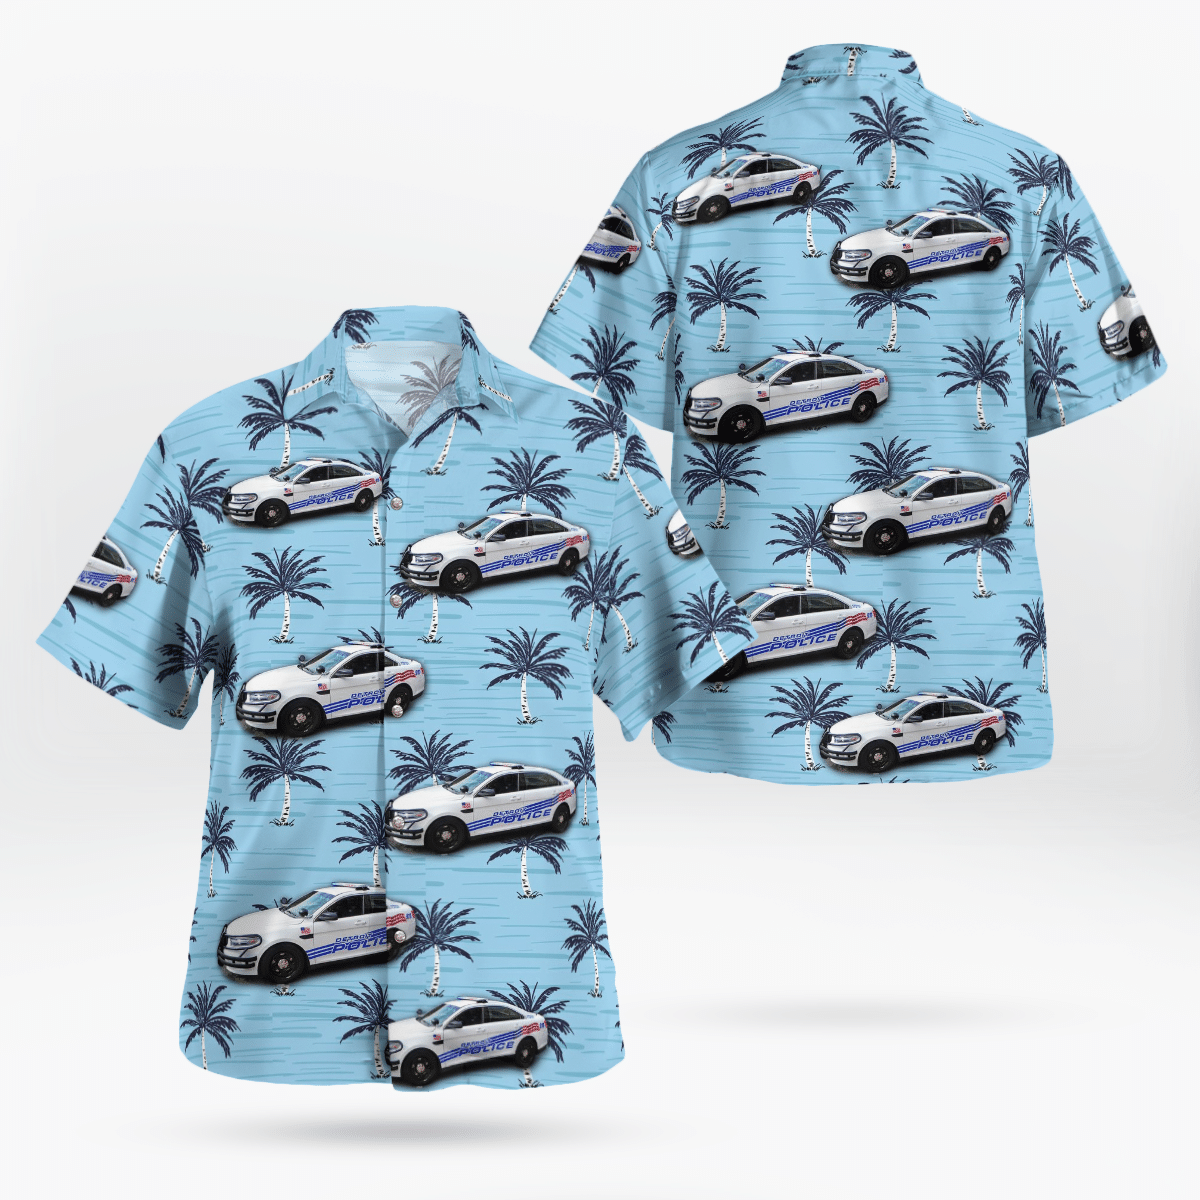 Top Hawaiian shirts are perfect for hot and humid days 191